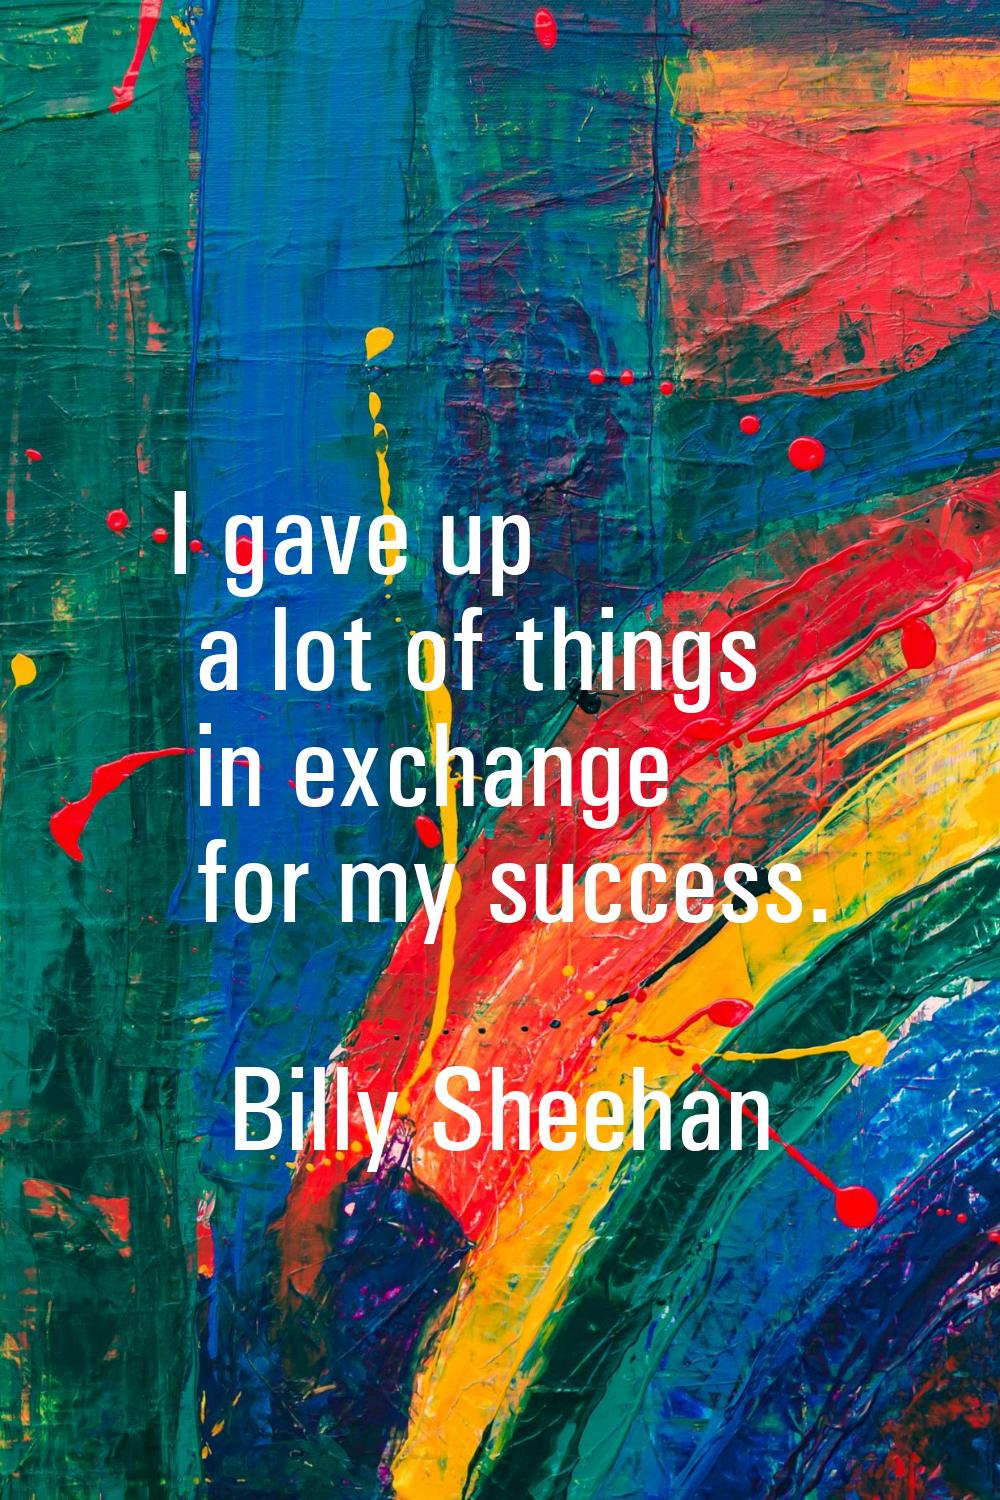 I gave up a lot of things in exchange for my success.